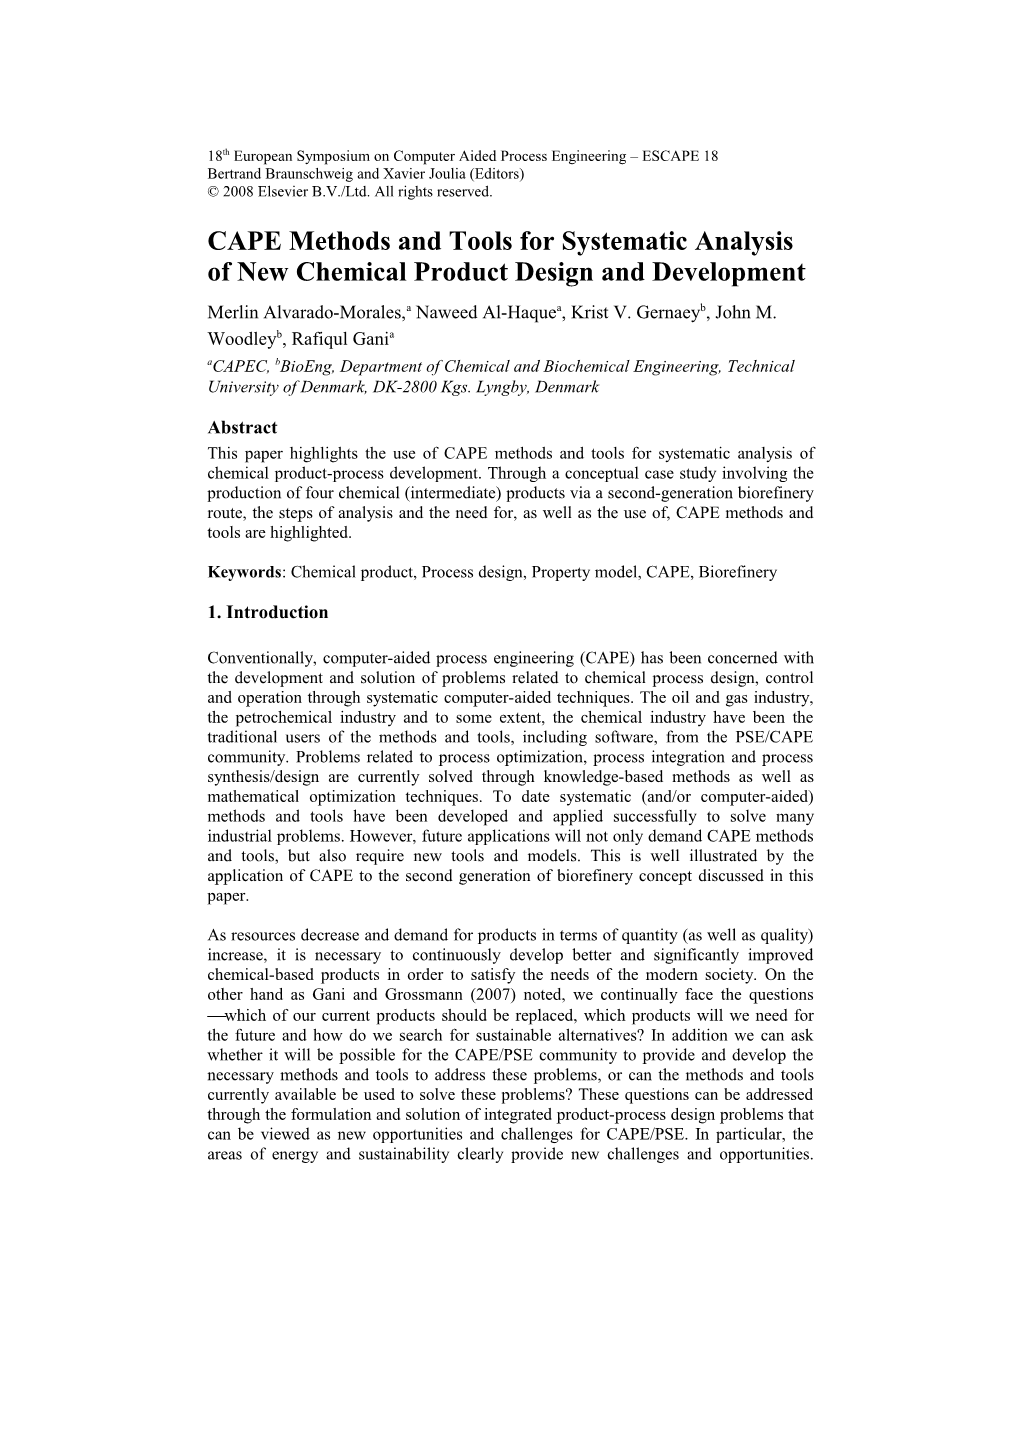 Capemethods and Tools for Systematic Analysis of New Chemical Product Design and Development